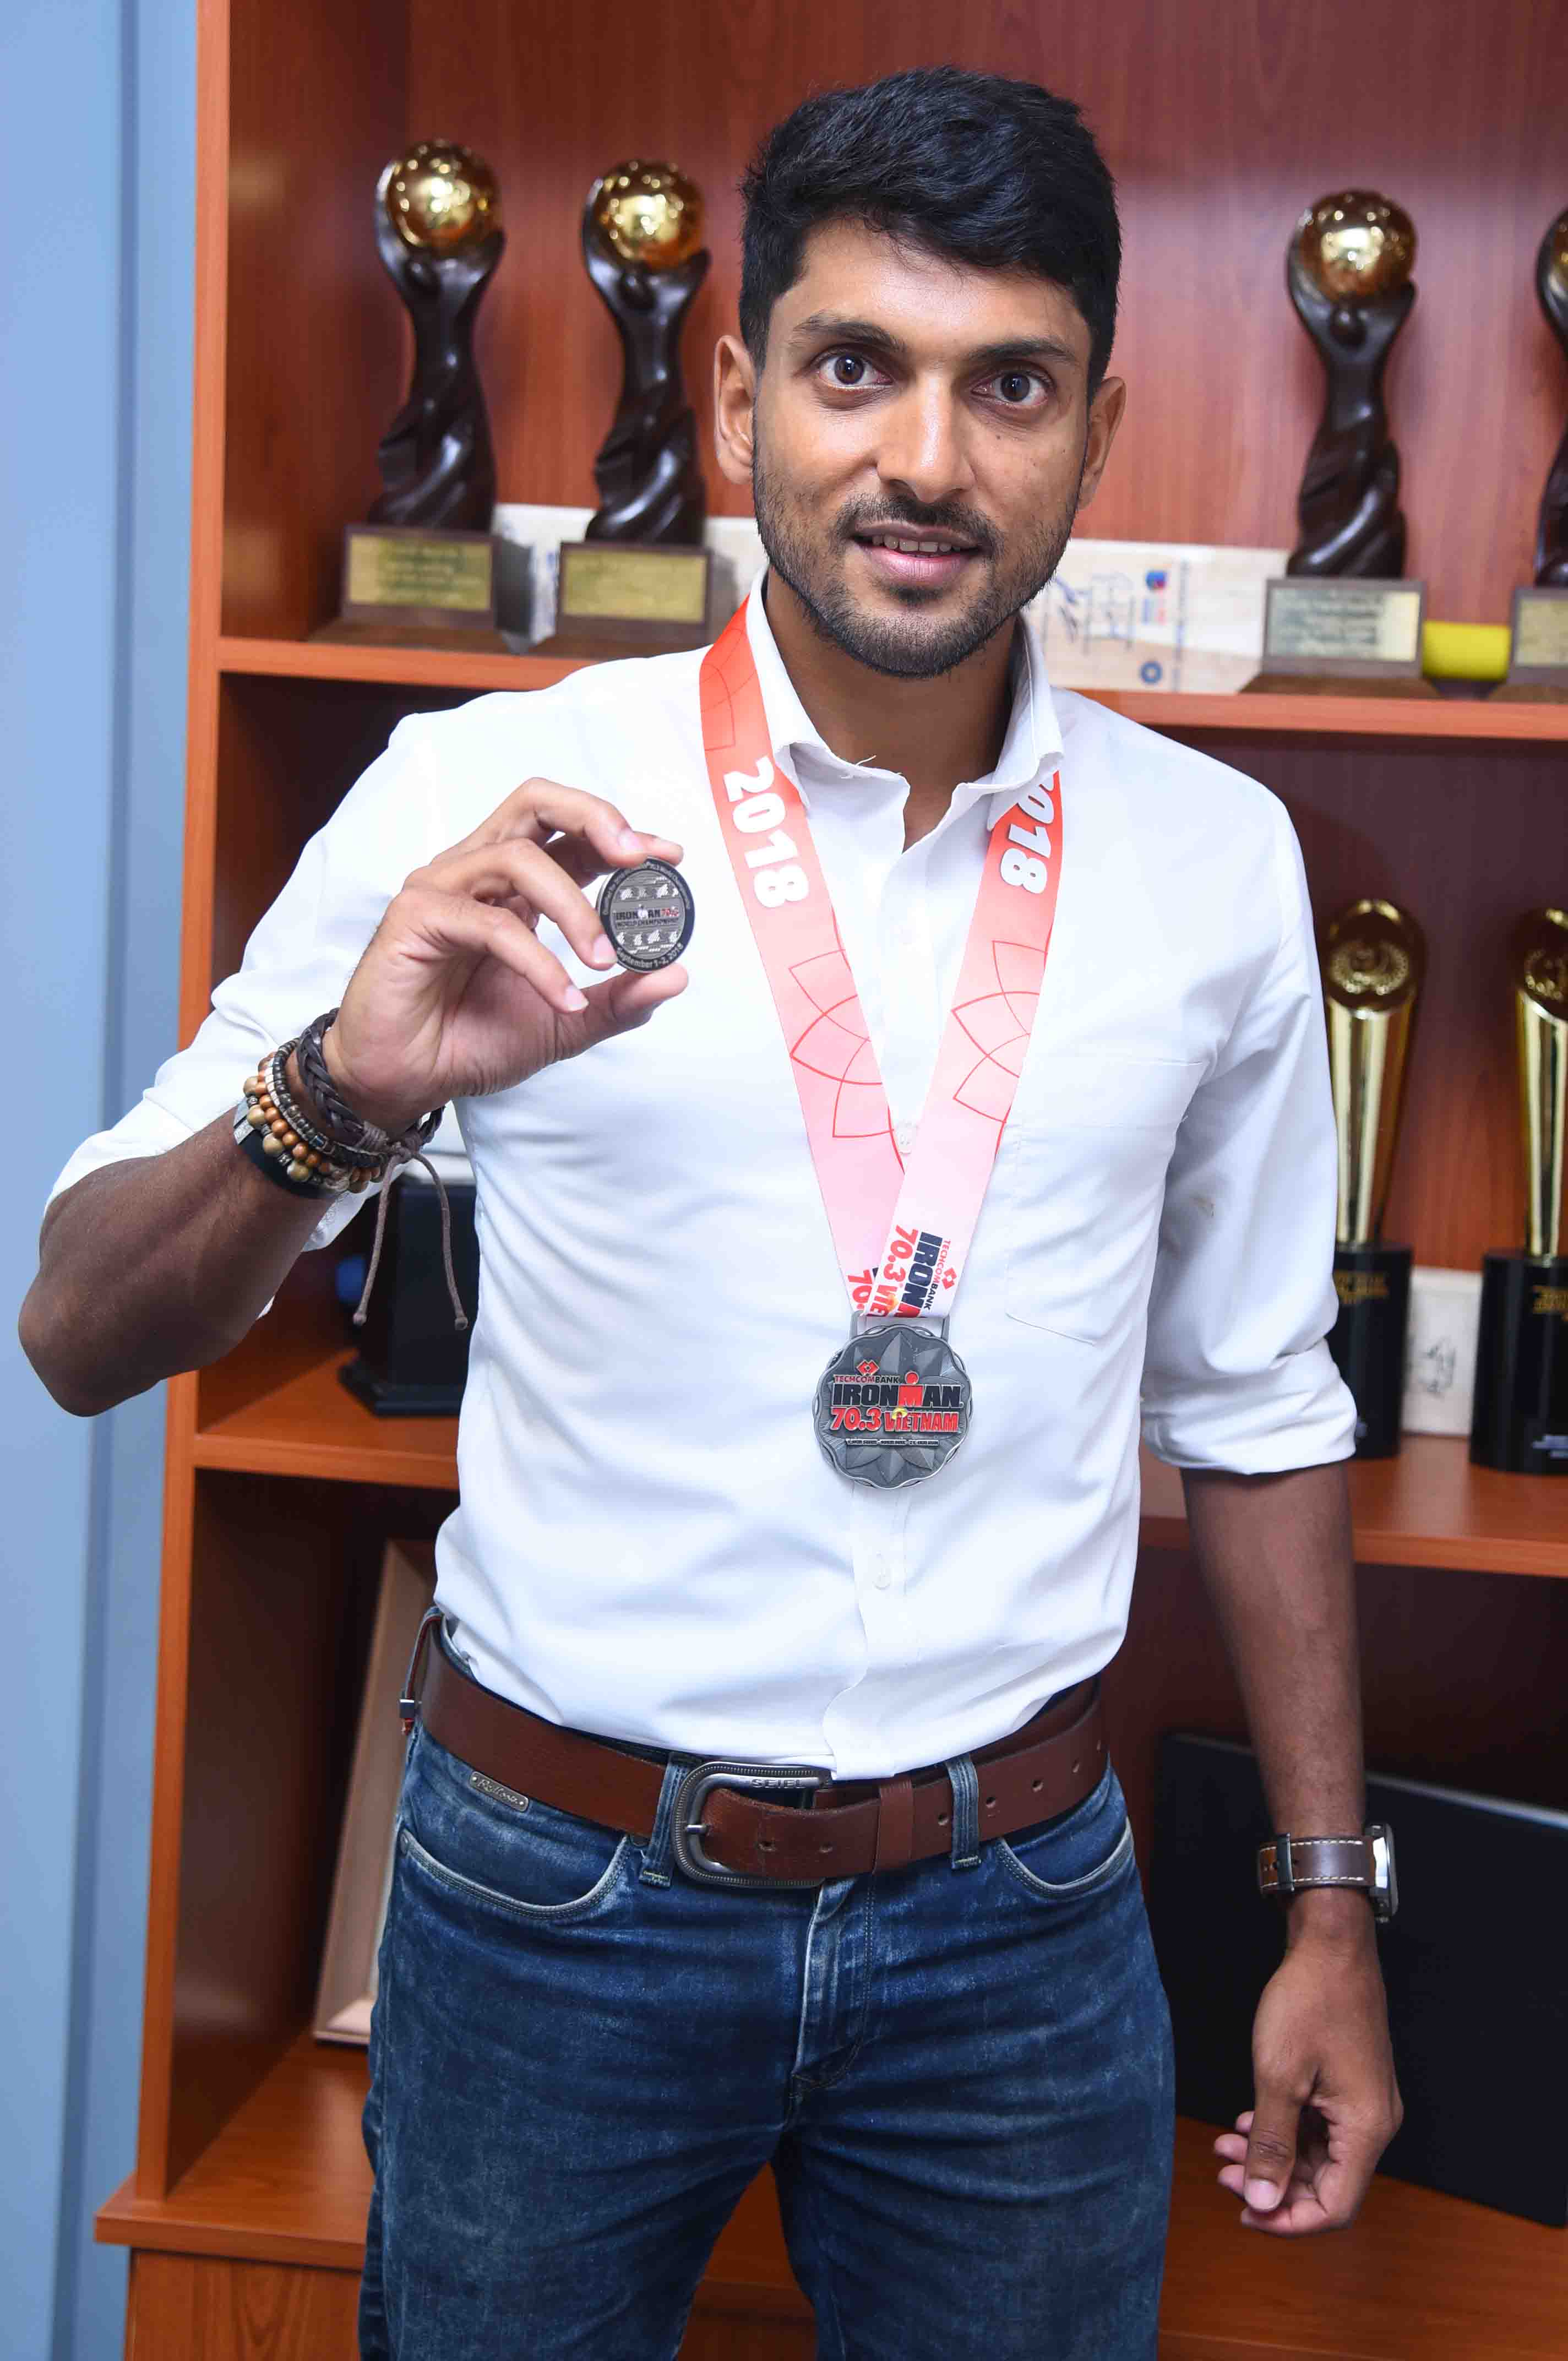 Mithun with his winning medals